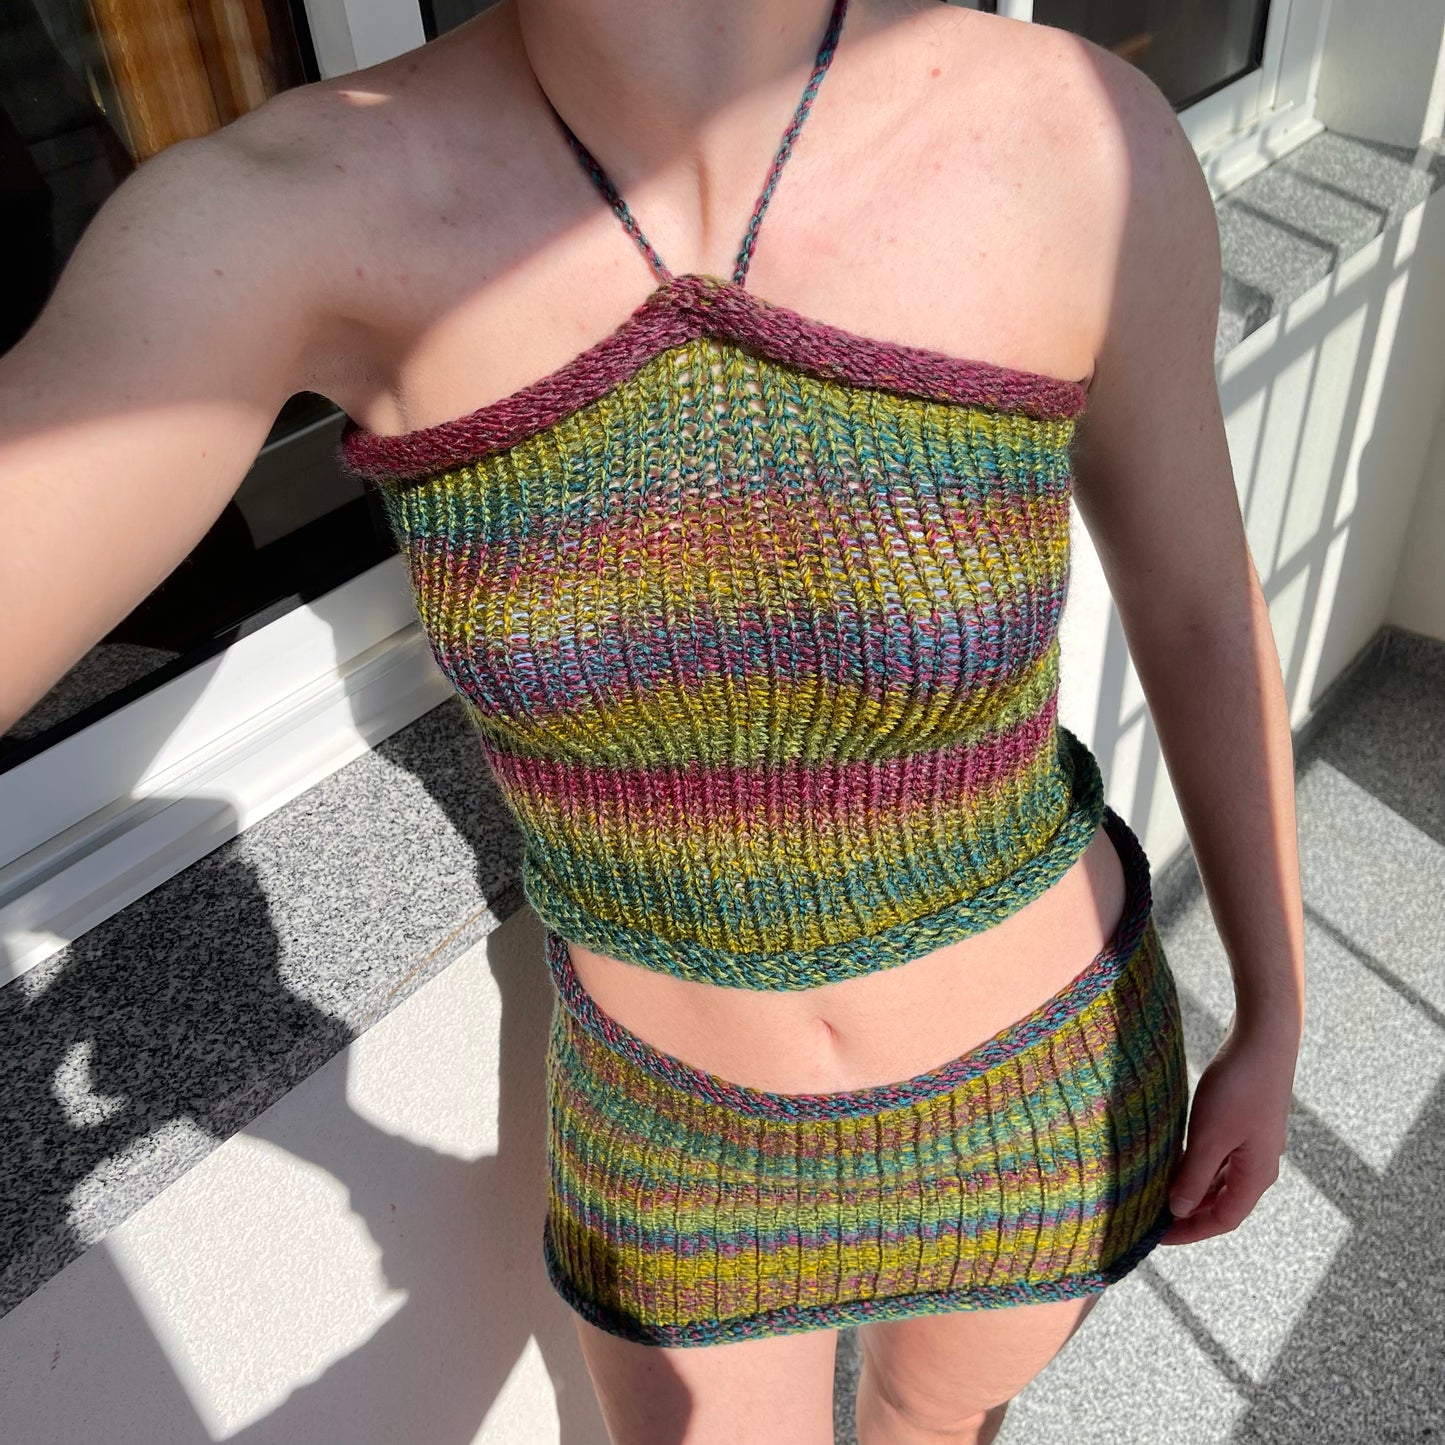 SET: Handmade knitted halter top and skirt in green, purple and blue